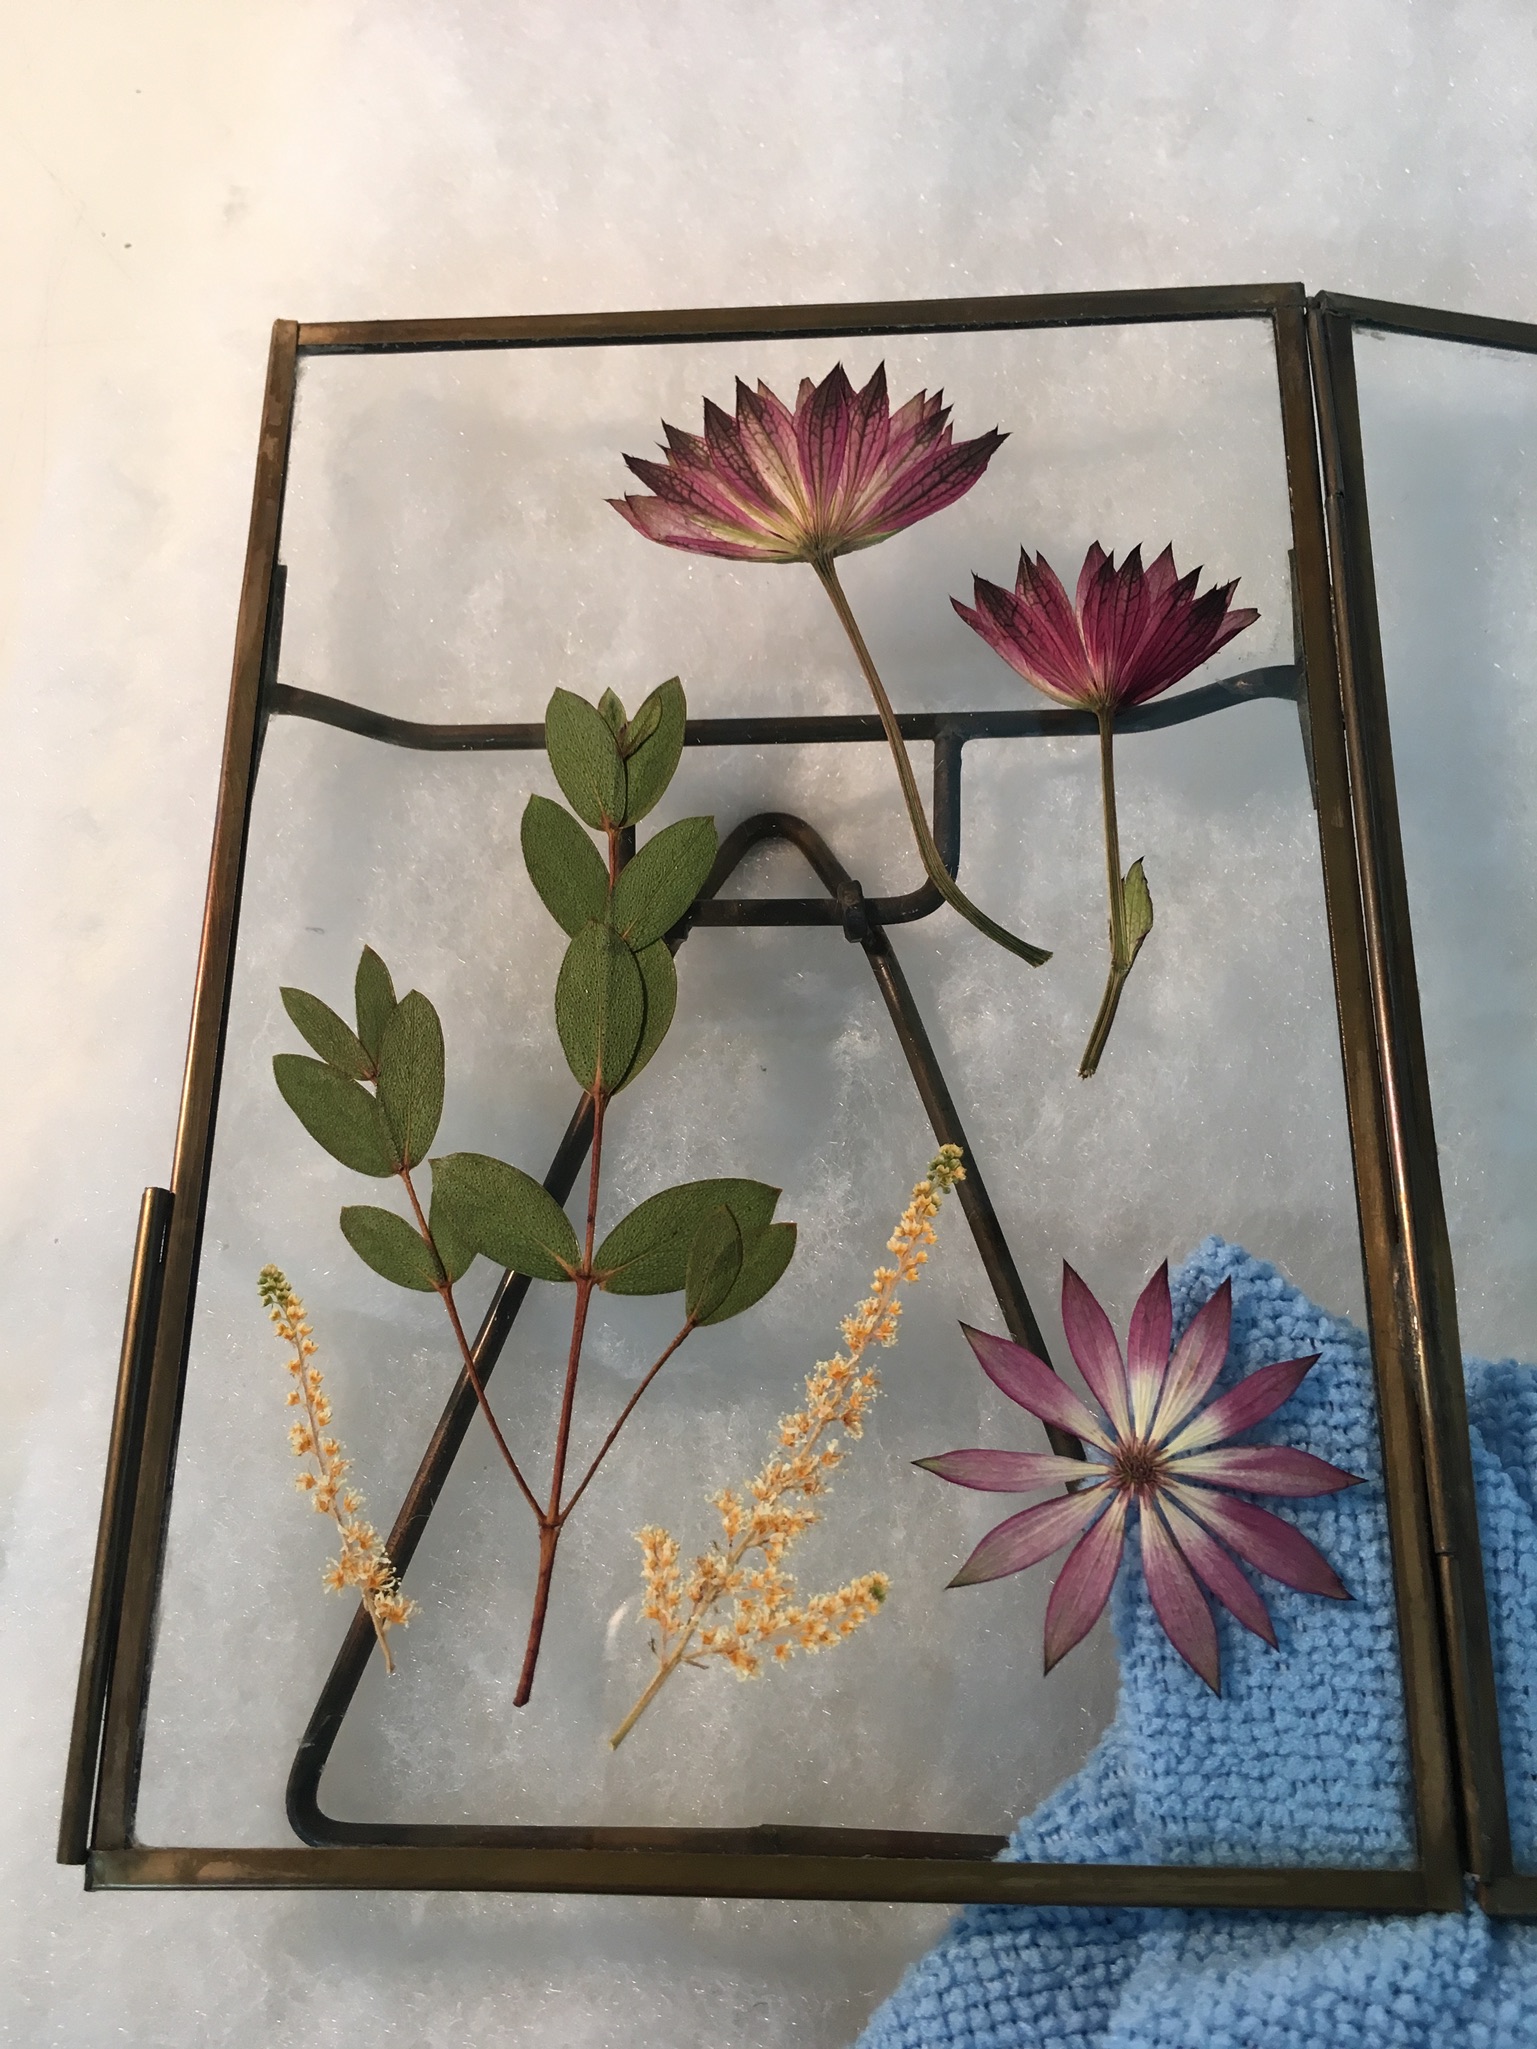 Framed Pressed Flowers Under Glass, 9 in x 9 in